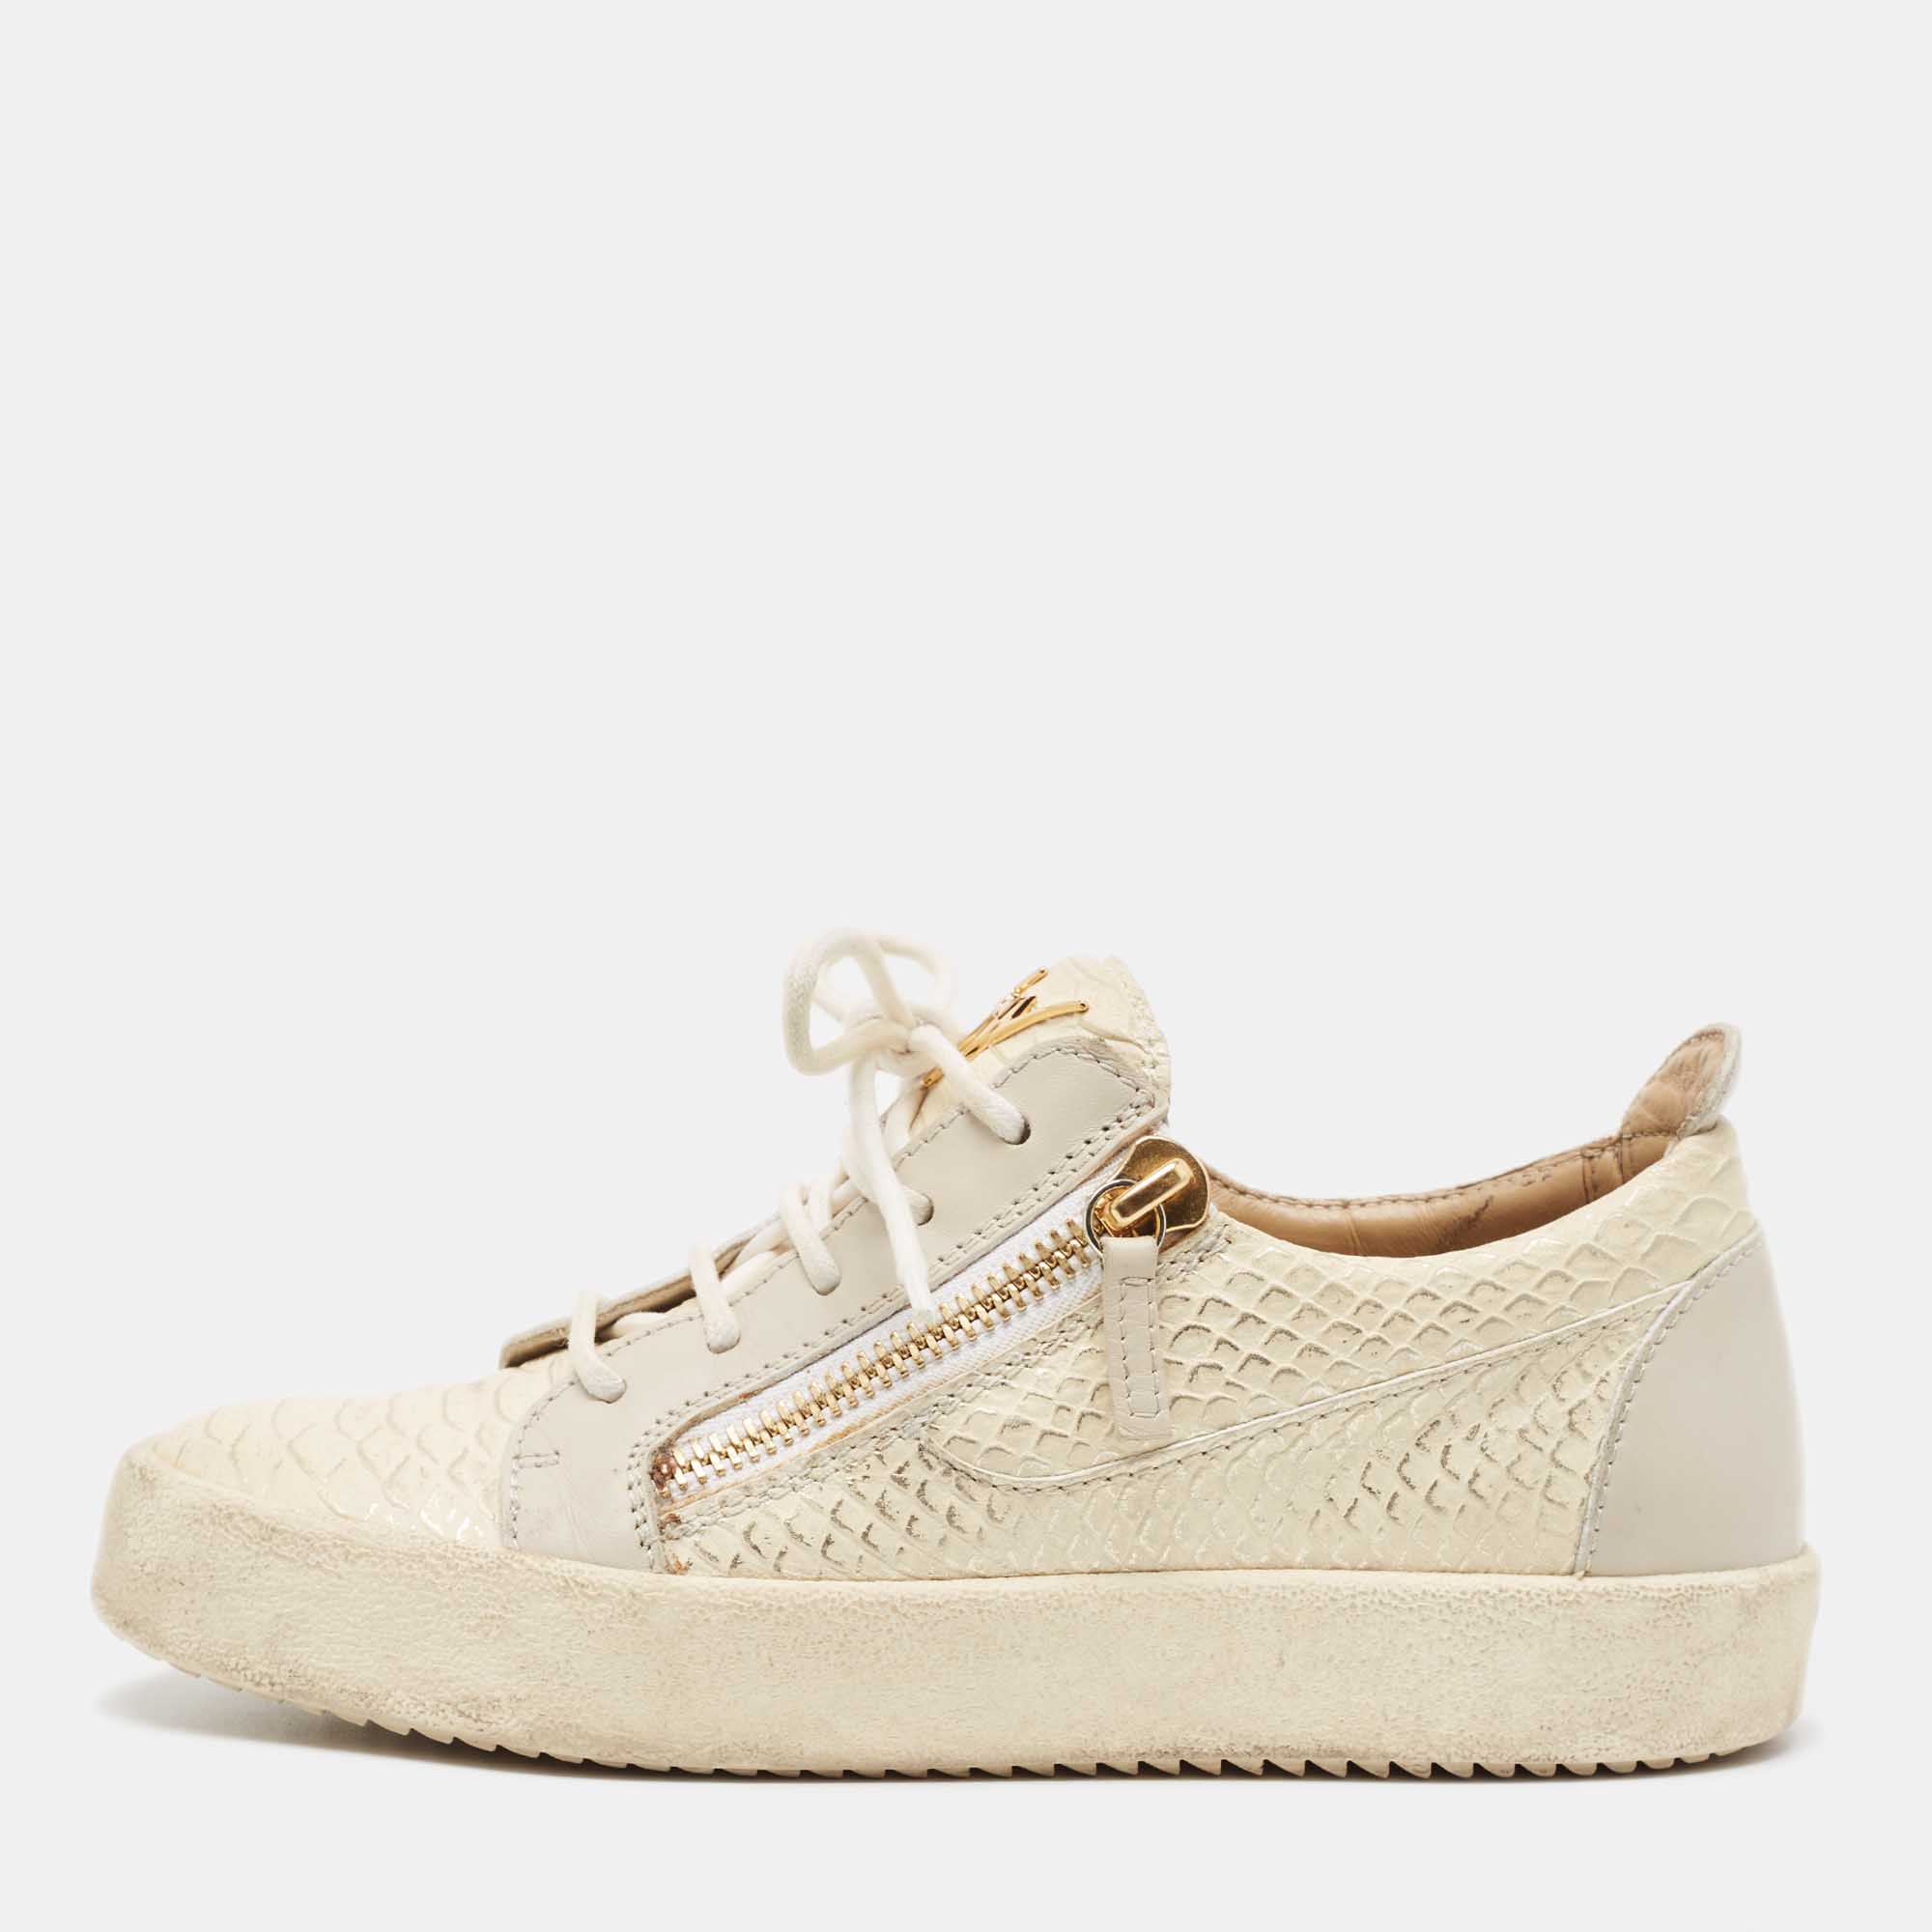 Giuseppe Zanotti Cream/Grey Embossed Python And Leather Frankie Sneakers Size 38.5